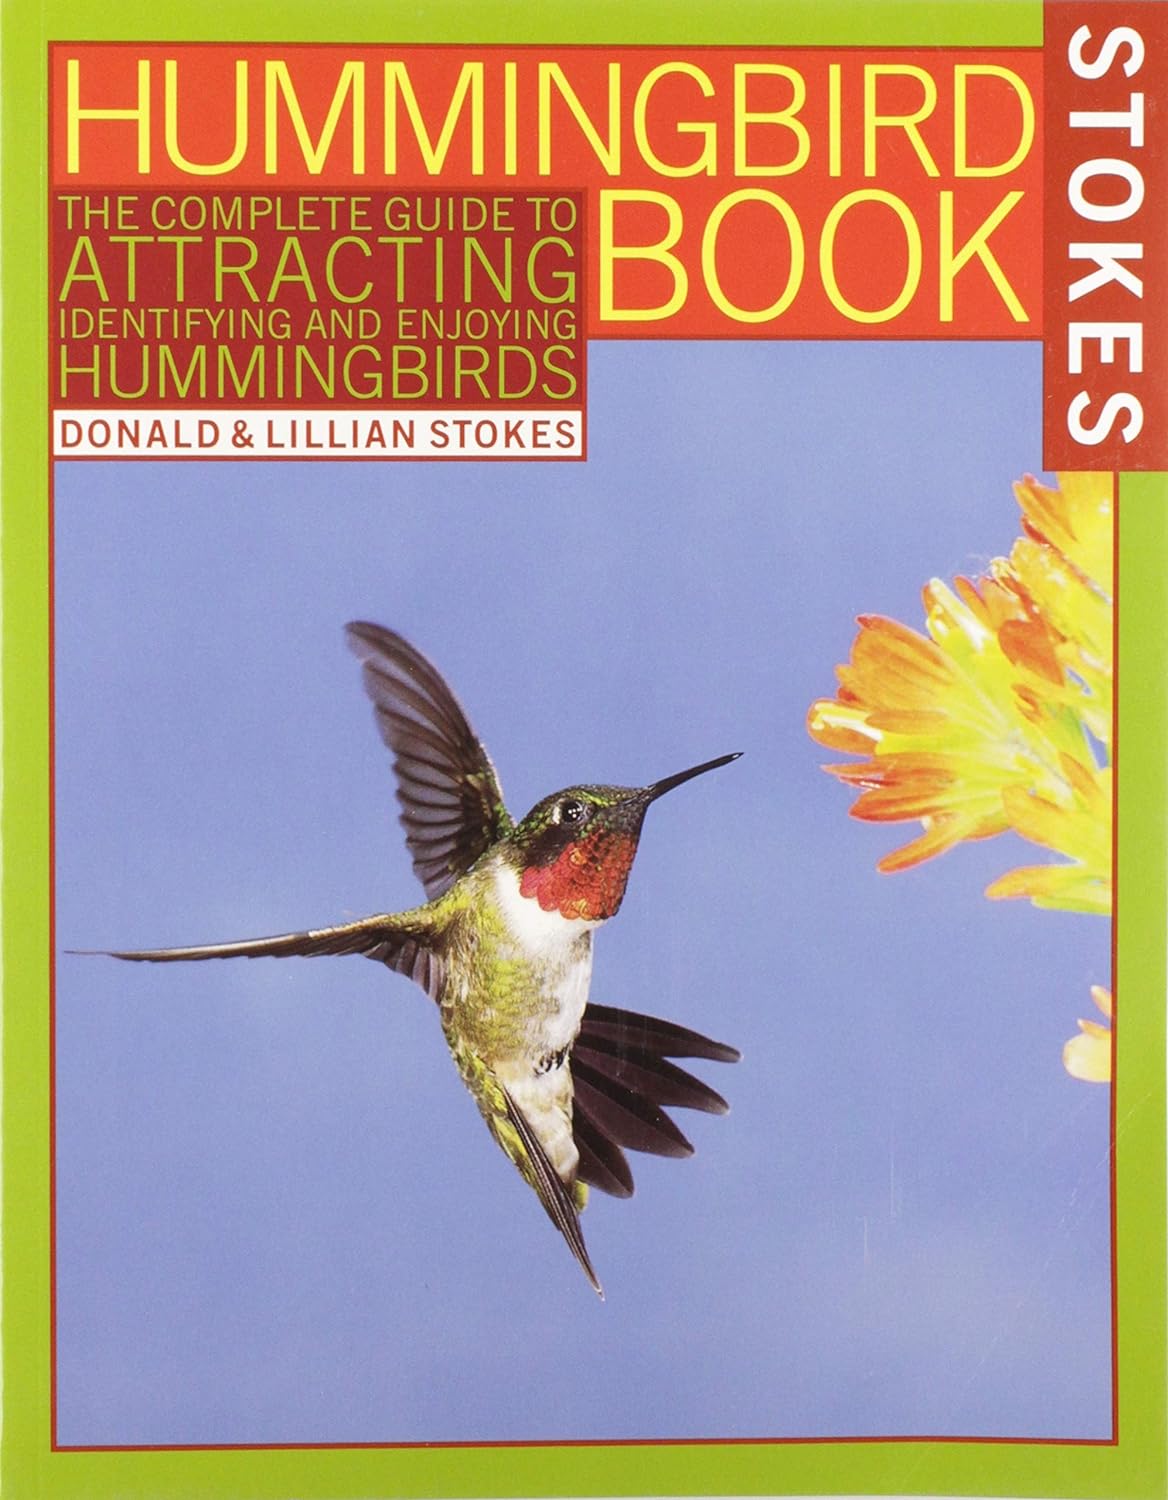 books about hummingbirds2